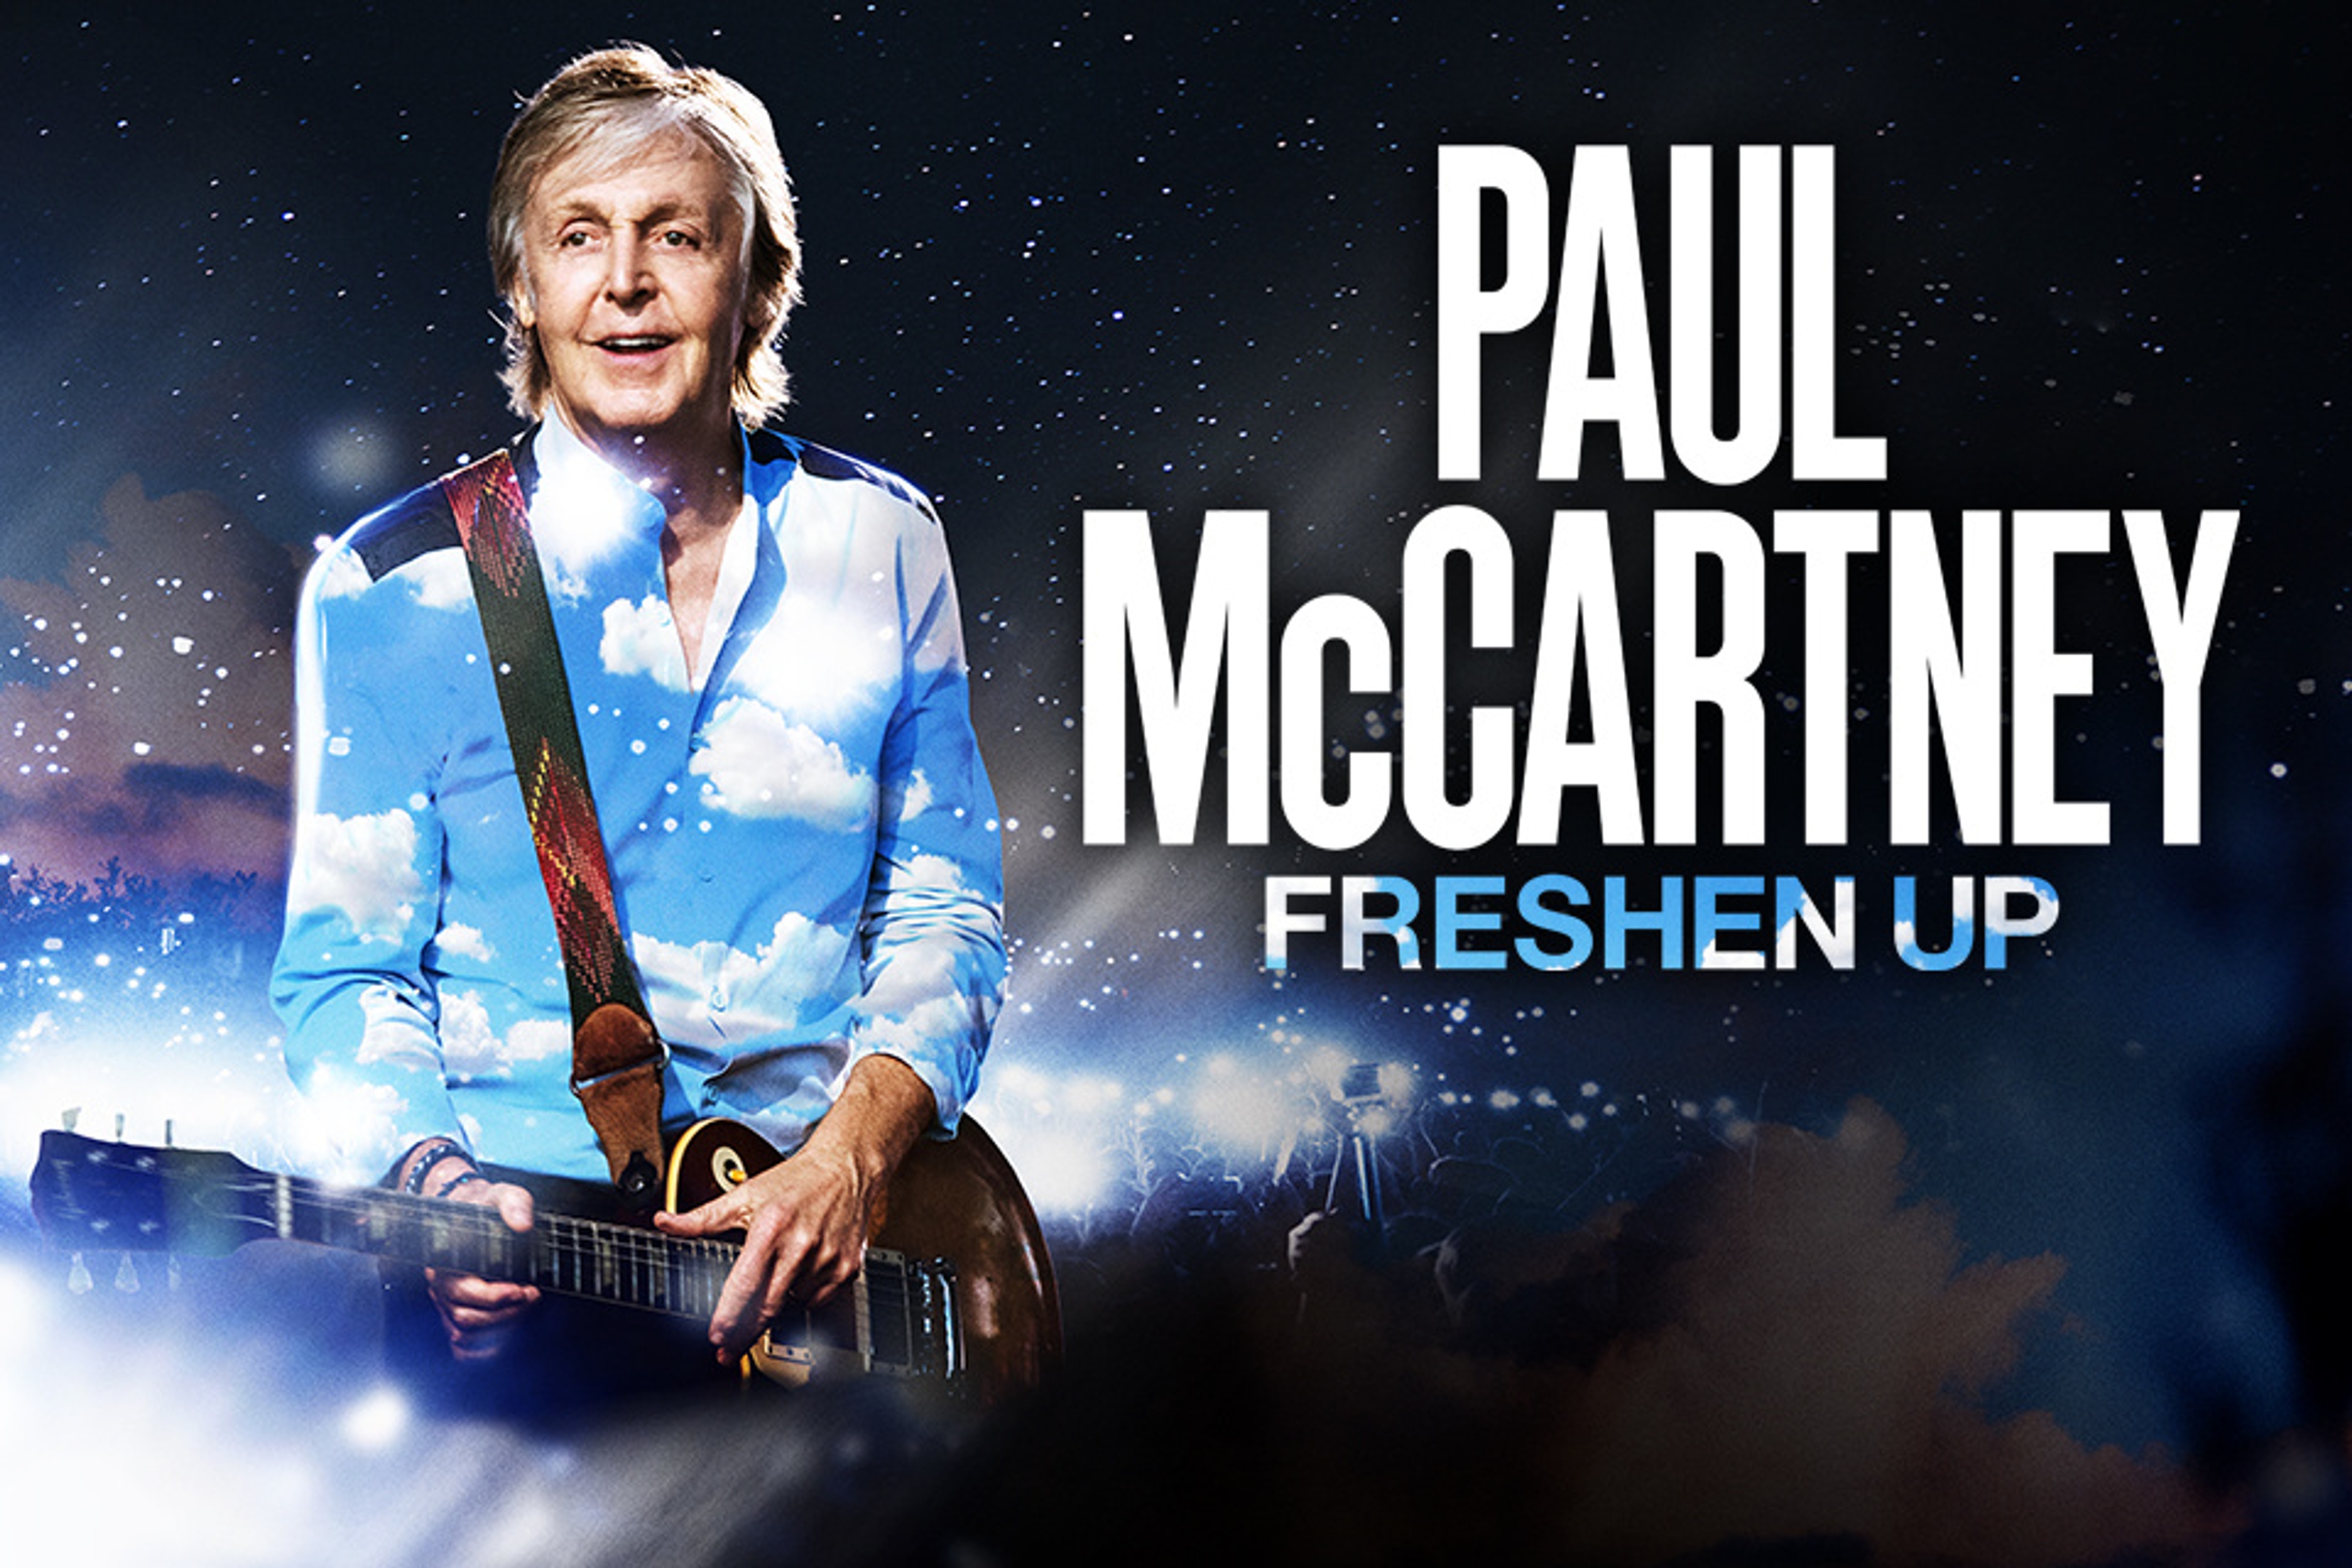 Photo of Paul McCartney playing guitar used for Freshen Up Tour